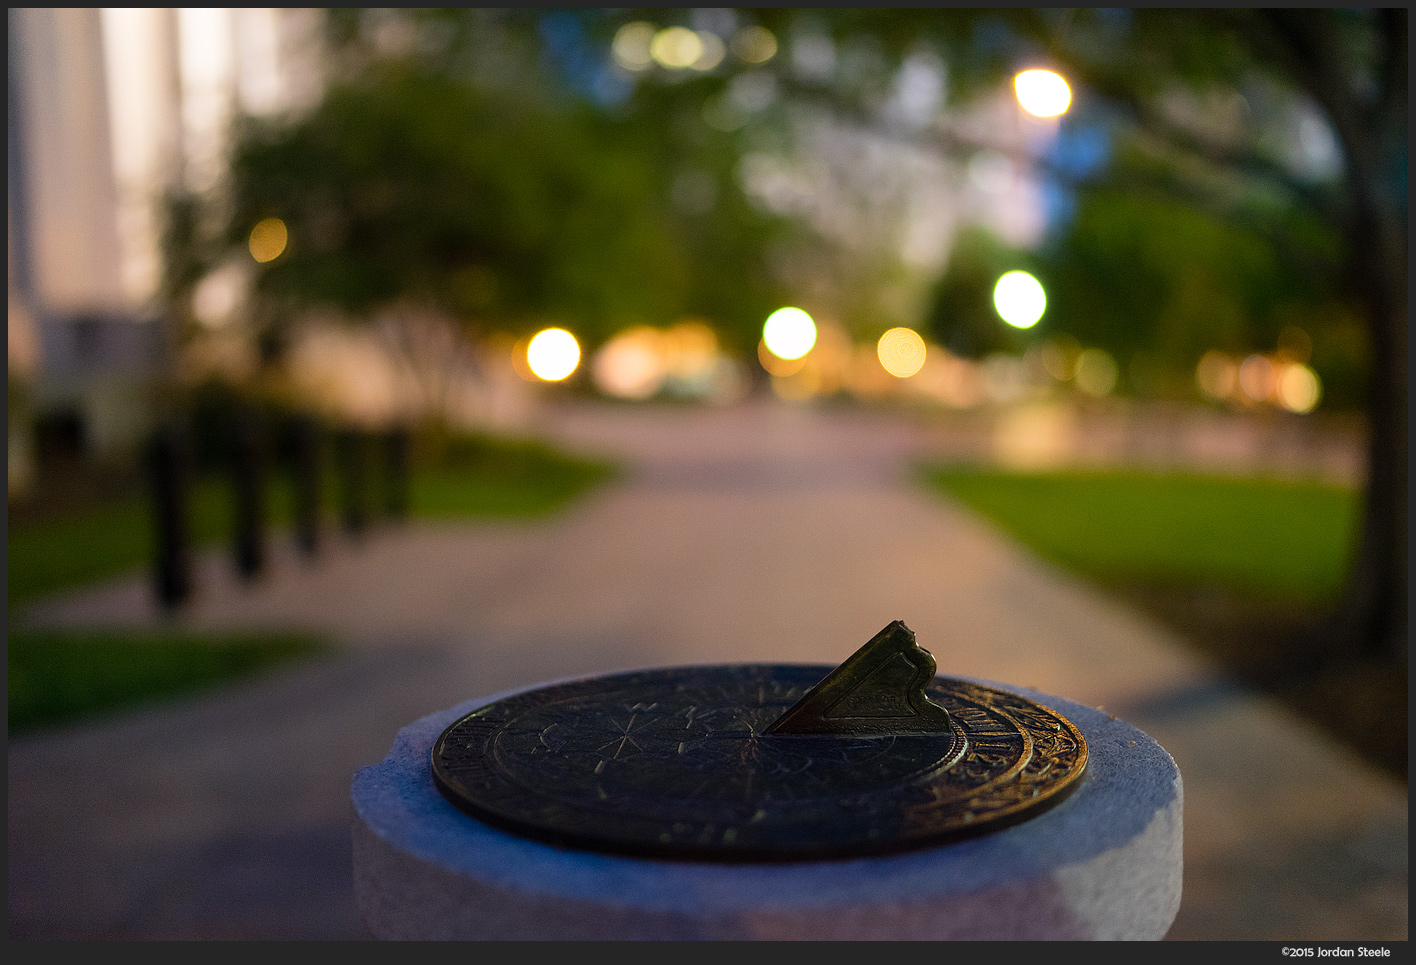 Night Dial - Sony A7 II with Zeiss FE 35mm f/1.4 Distagon @ f/1.4